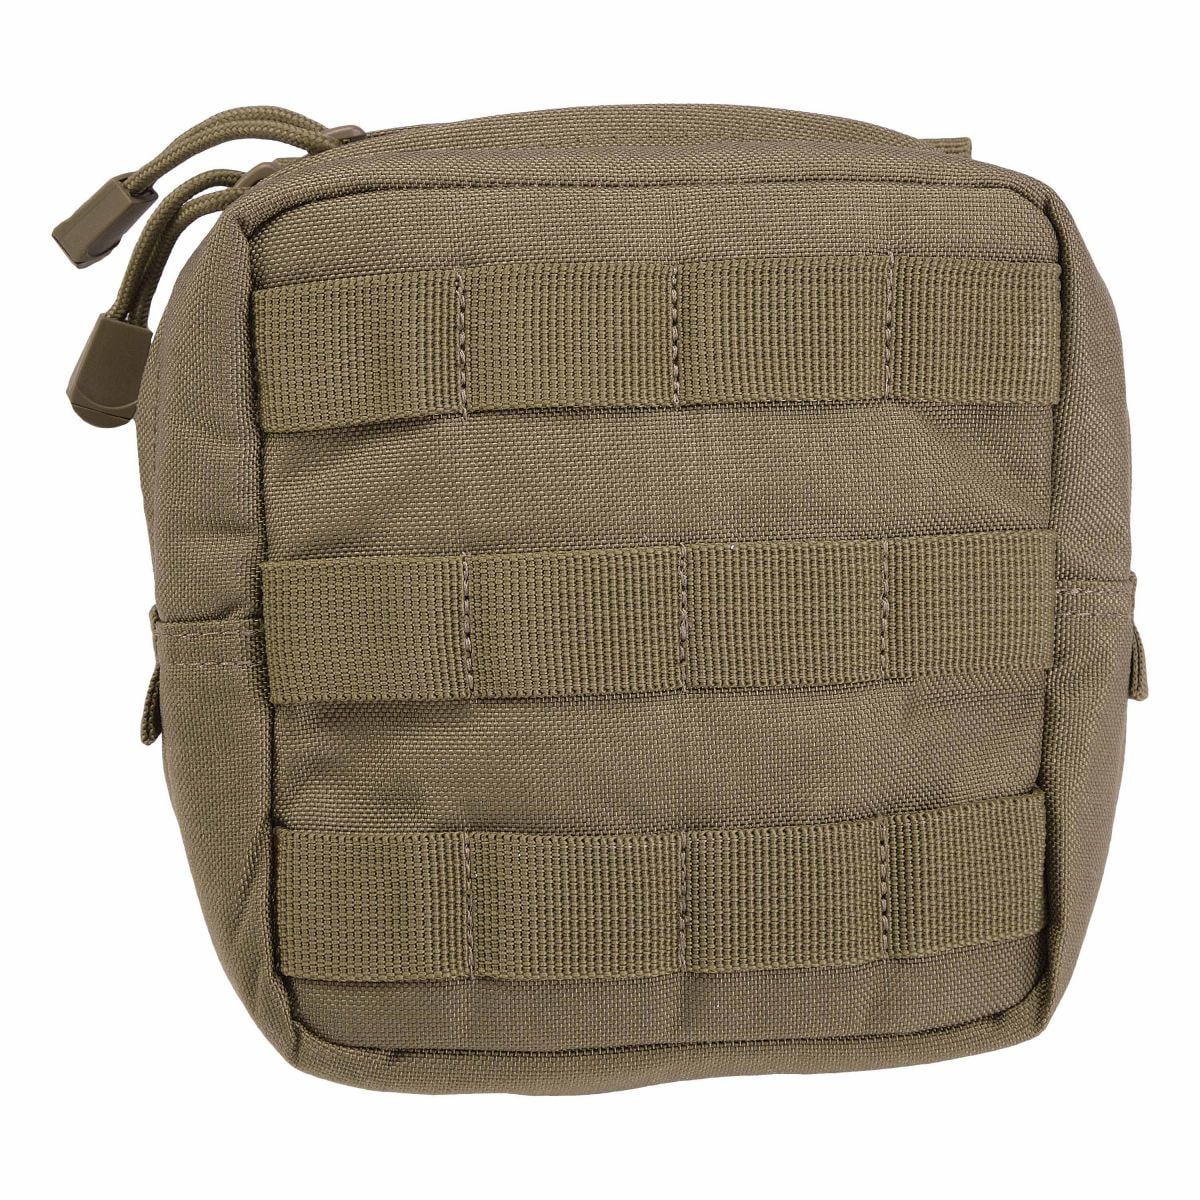 5.11 Pouch 6.6 Padded Pouch sandstone | 5.11 Pouch 6.6 Padded Pouch ...